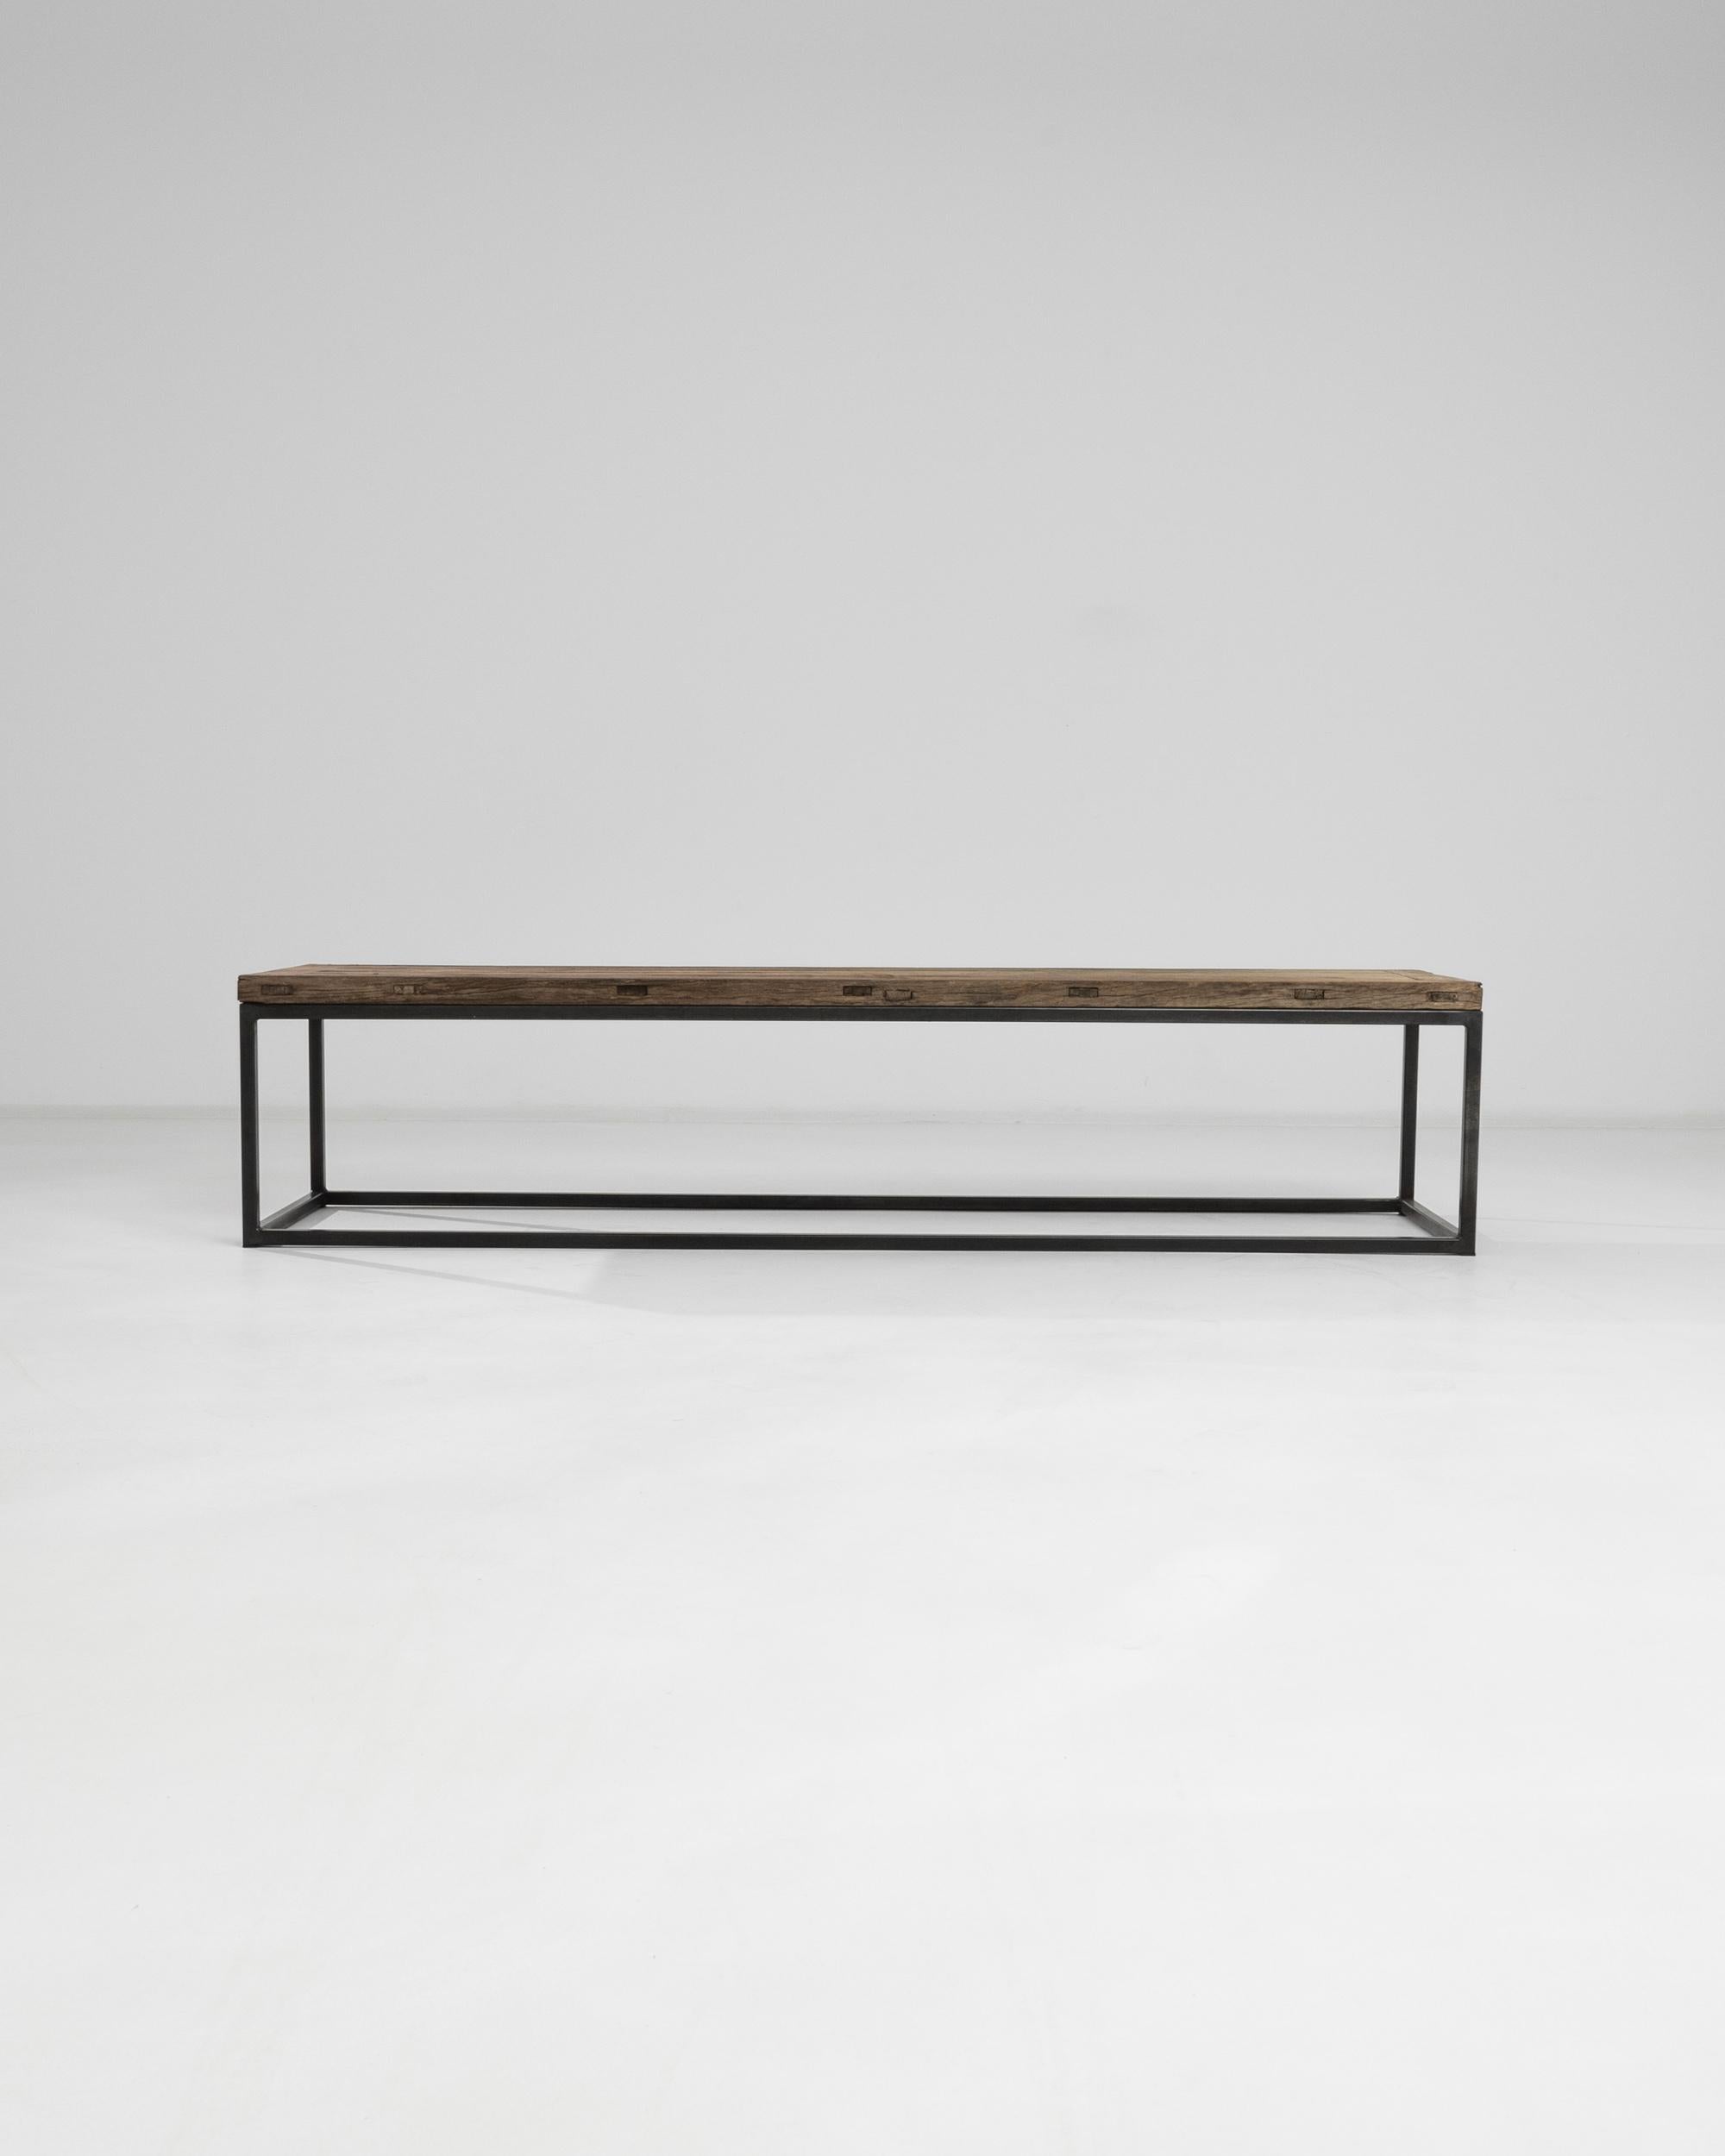 Echoing minimalist tendencies of Western mid-century furniture, this coffee tabletop was crafted in China circa 1900. The sleek rectangular base made out of blackened iron elevates the raw wooden top with few marks of time. Metal and wood, two